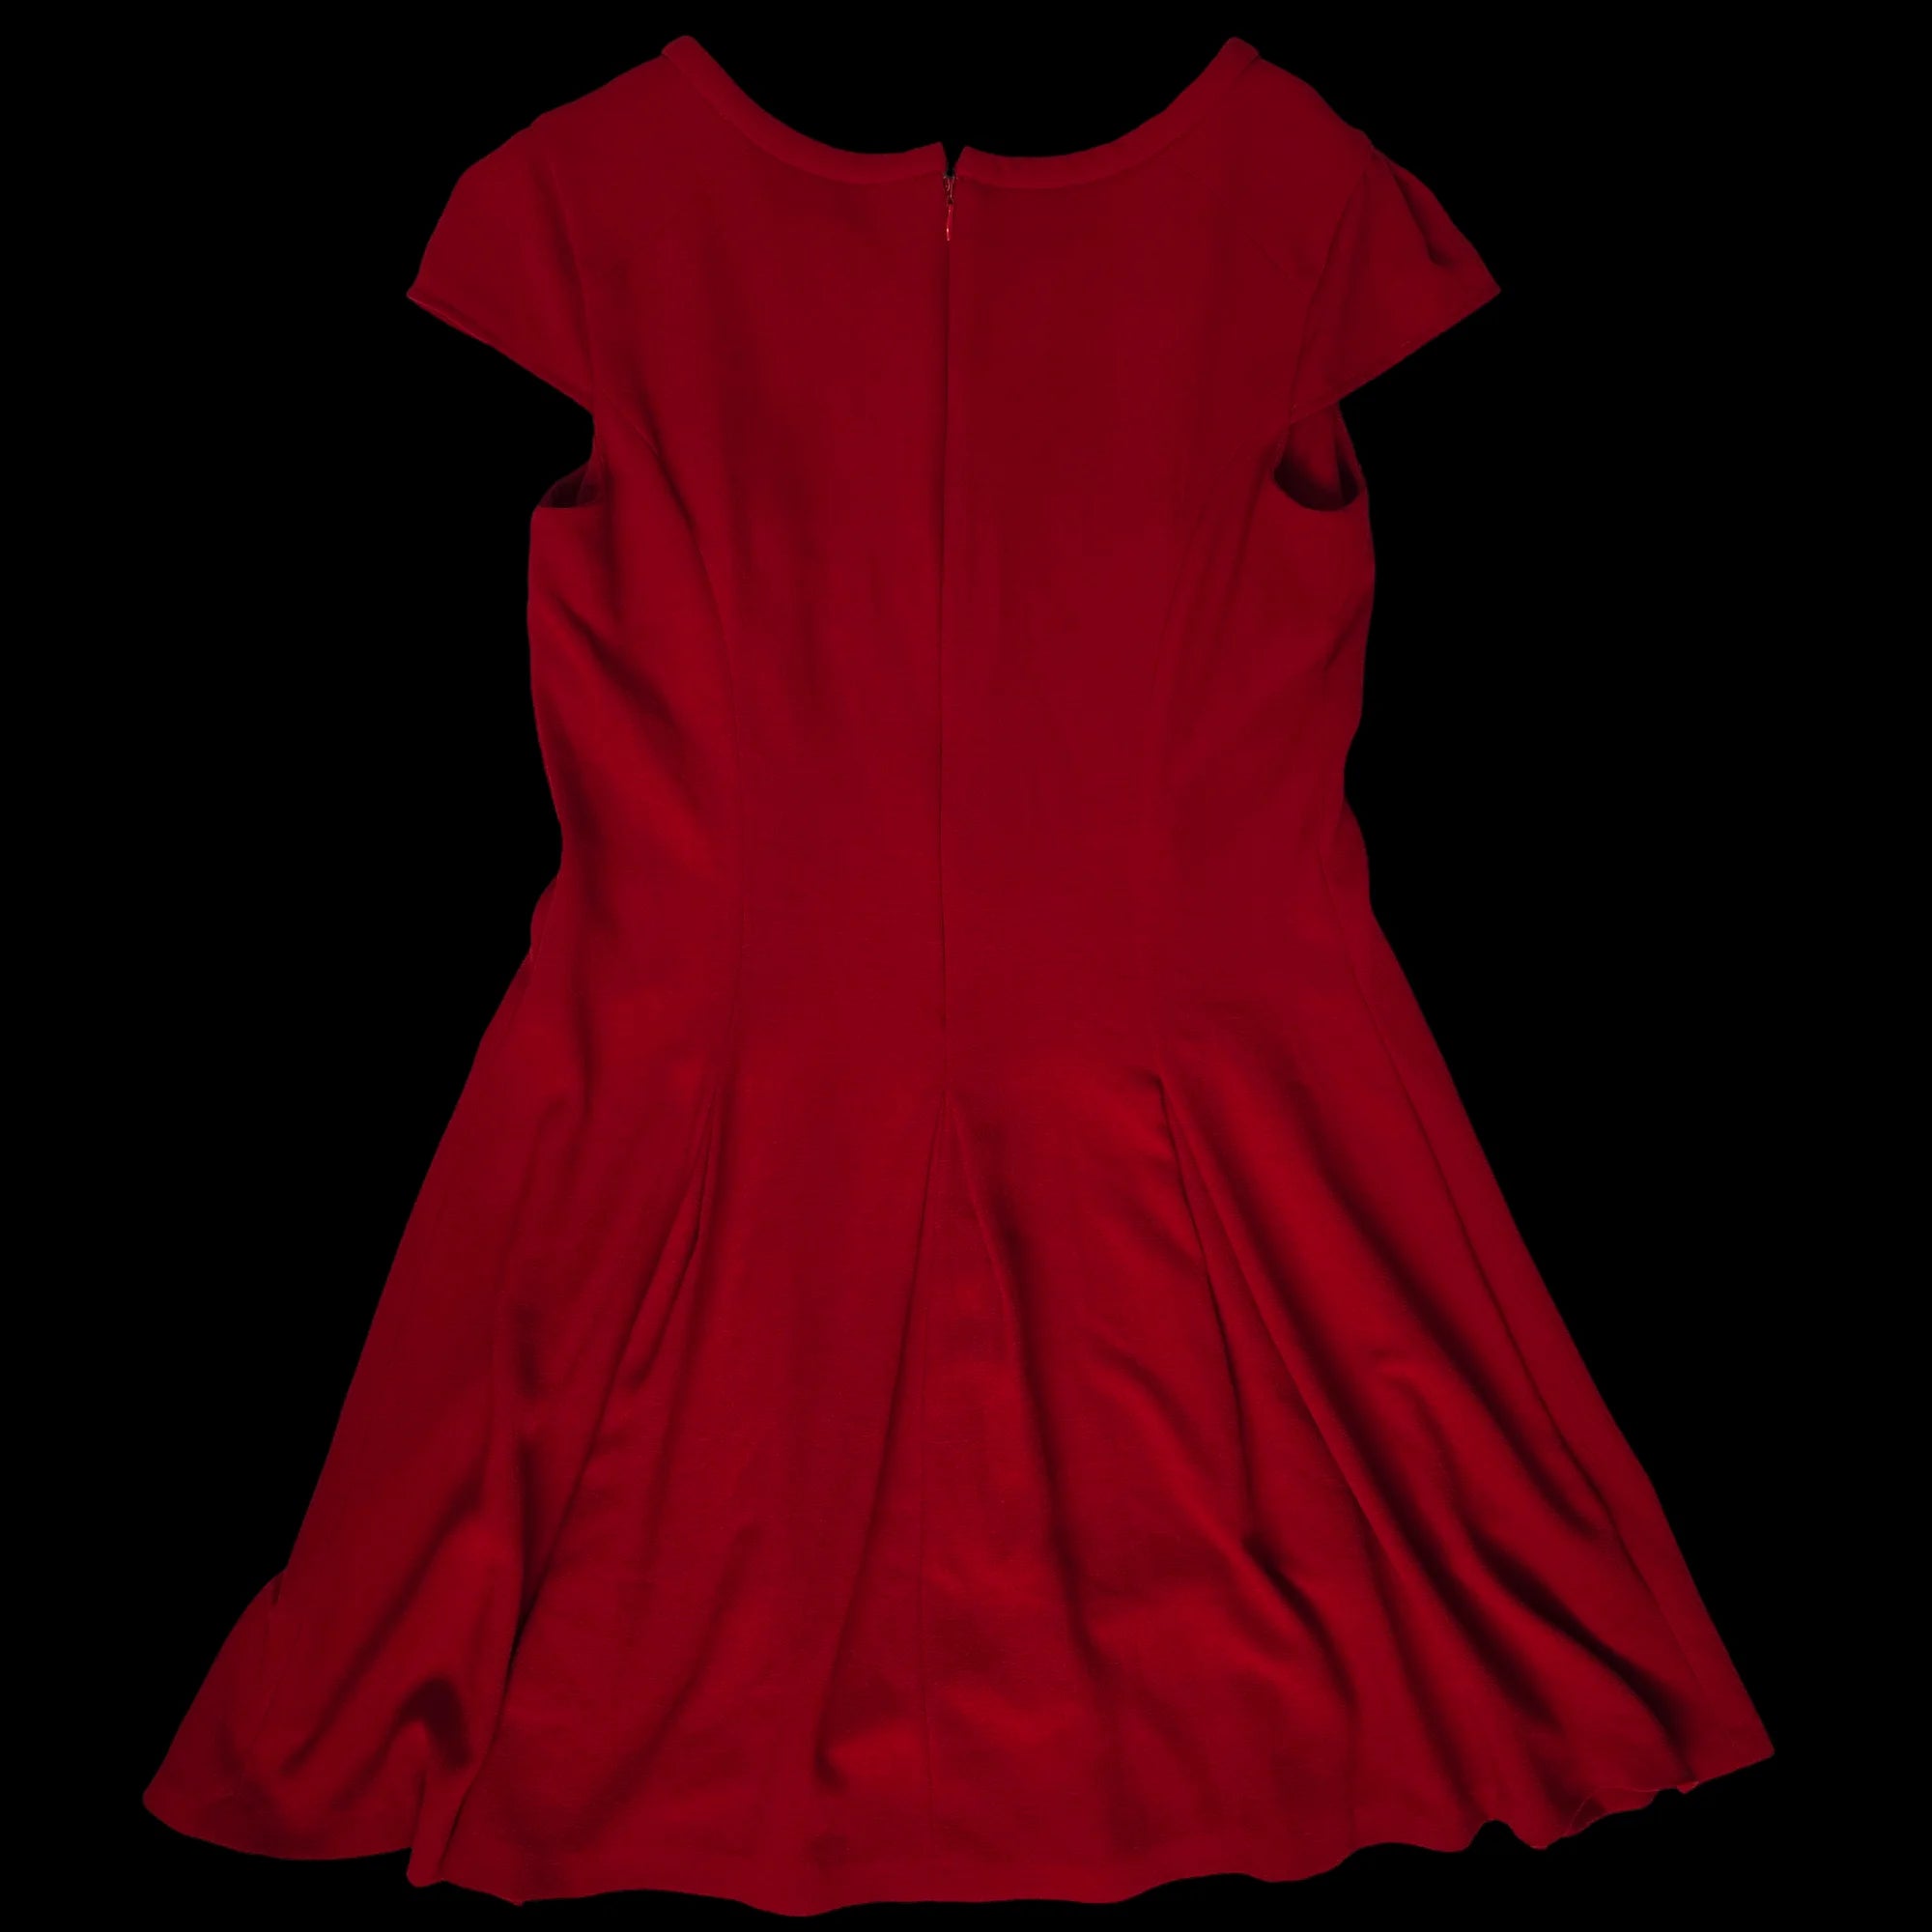 Womens Next Red Fit And Flare Dress UK 14 - Dresses - 5